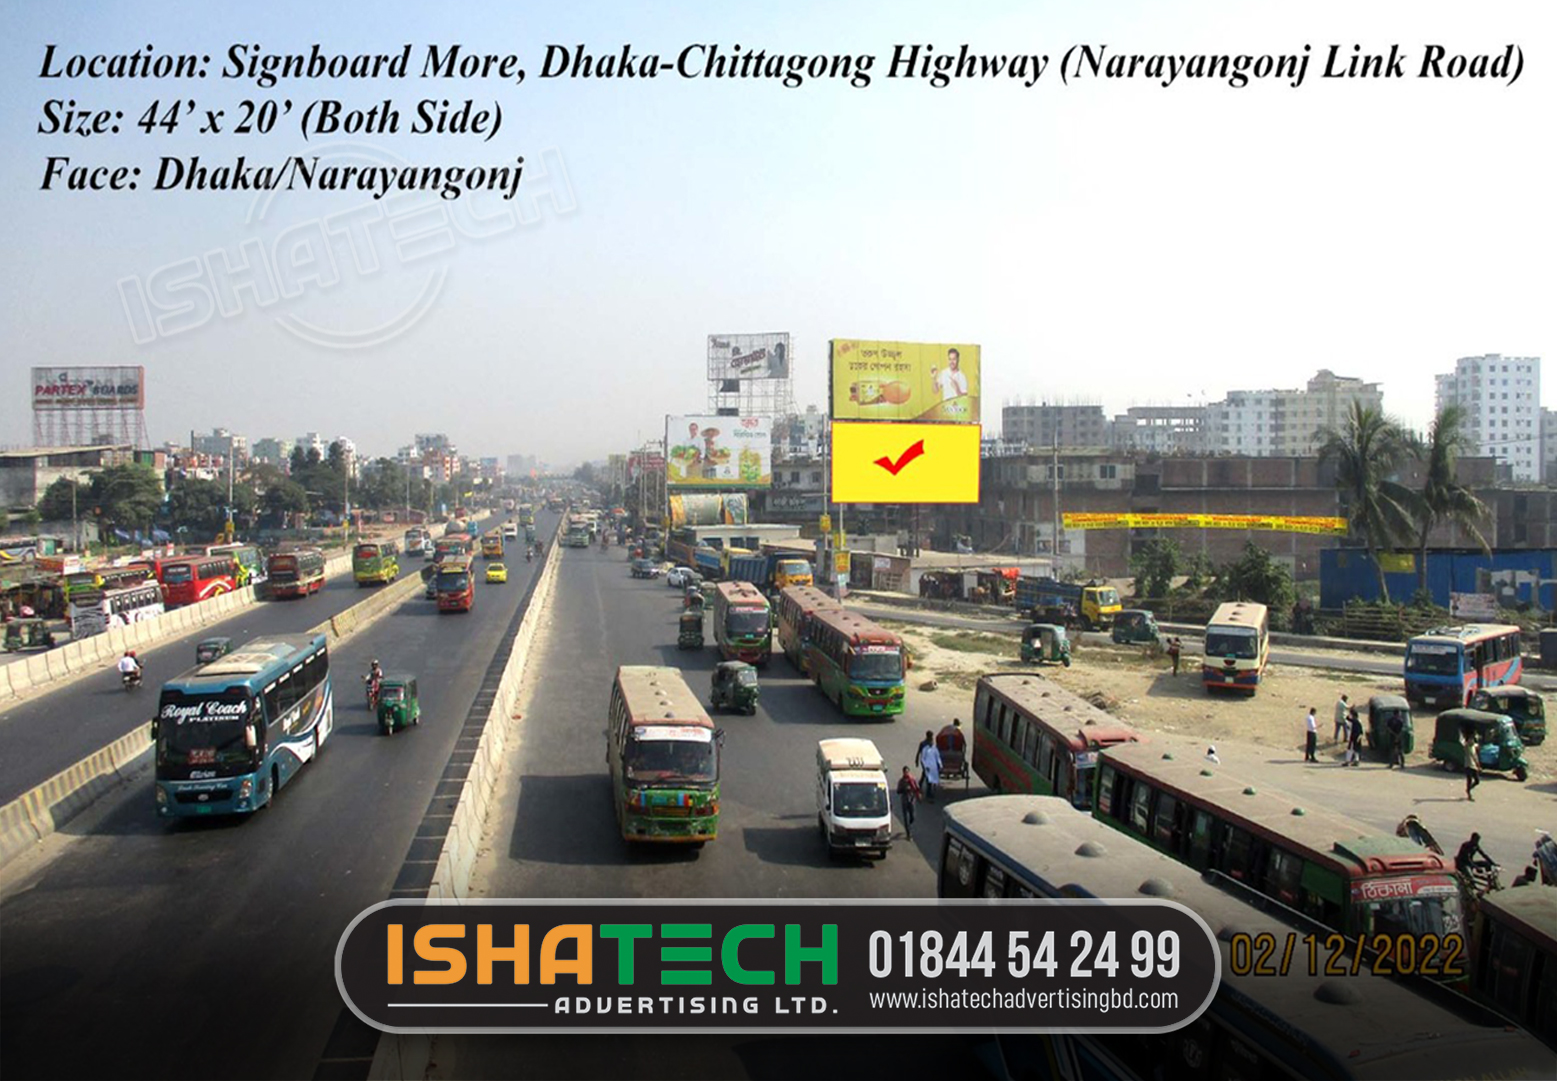 Led Signboard is a leading Led Advertising Agency in Bangladesh. Our Product Led Billboard Nameplate Signboard.